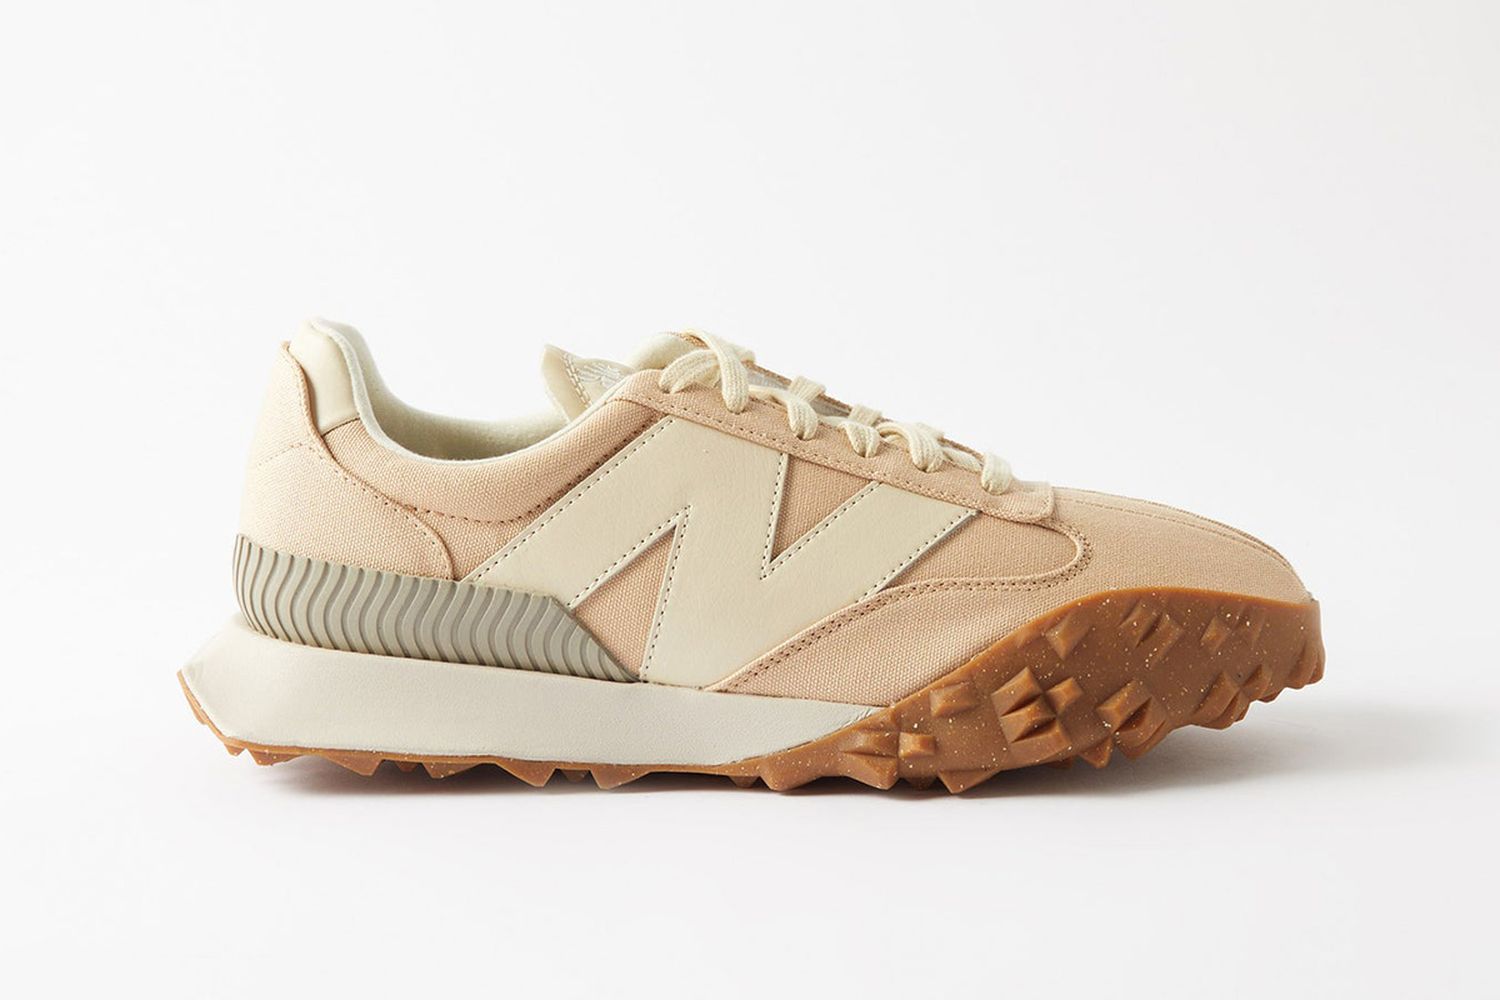 Sureste Predicar Zanahoria The 13 Best New Balance Sneakers Available to Buy Right Now